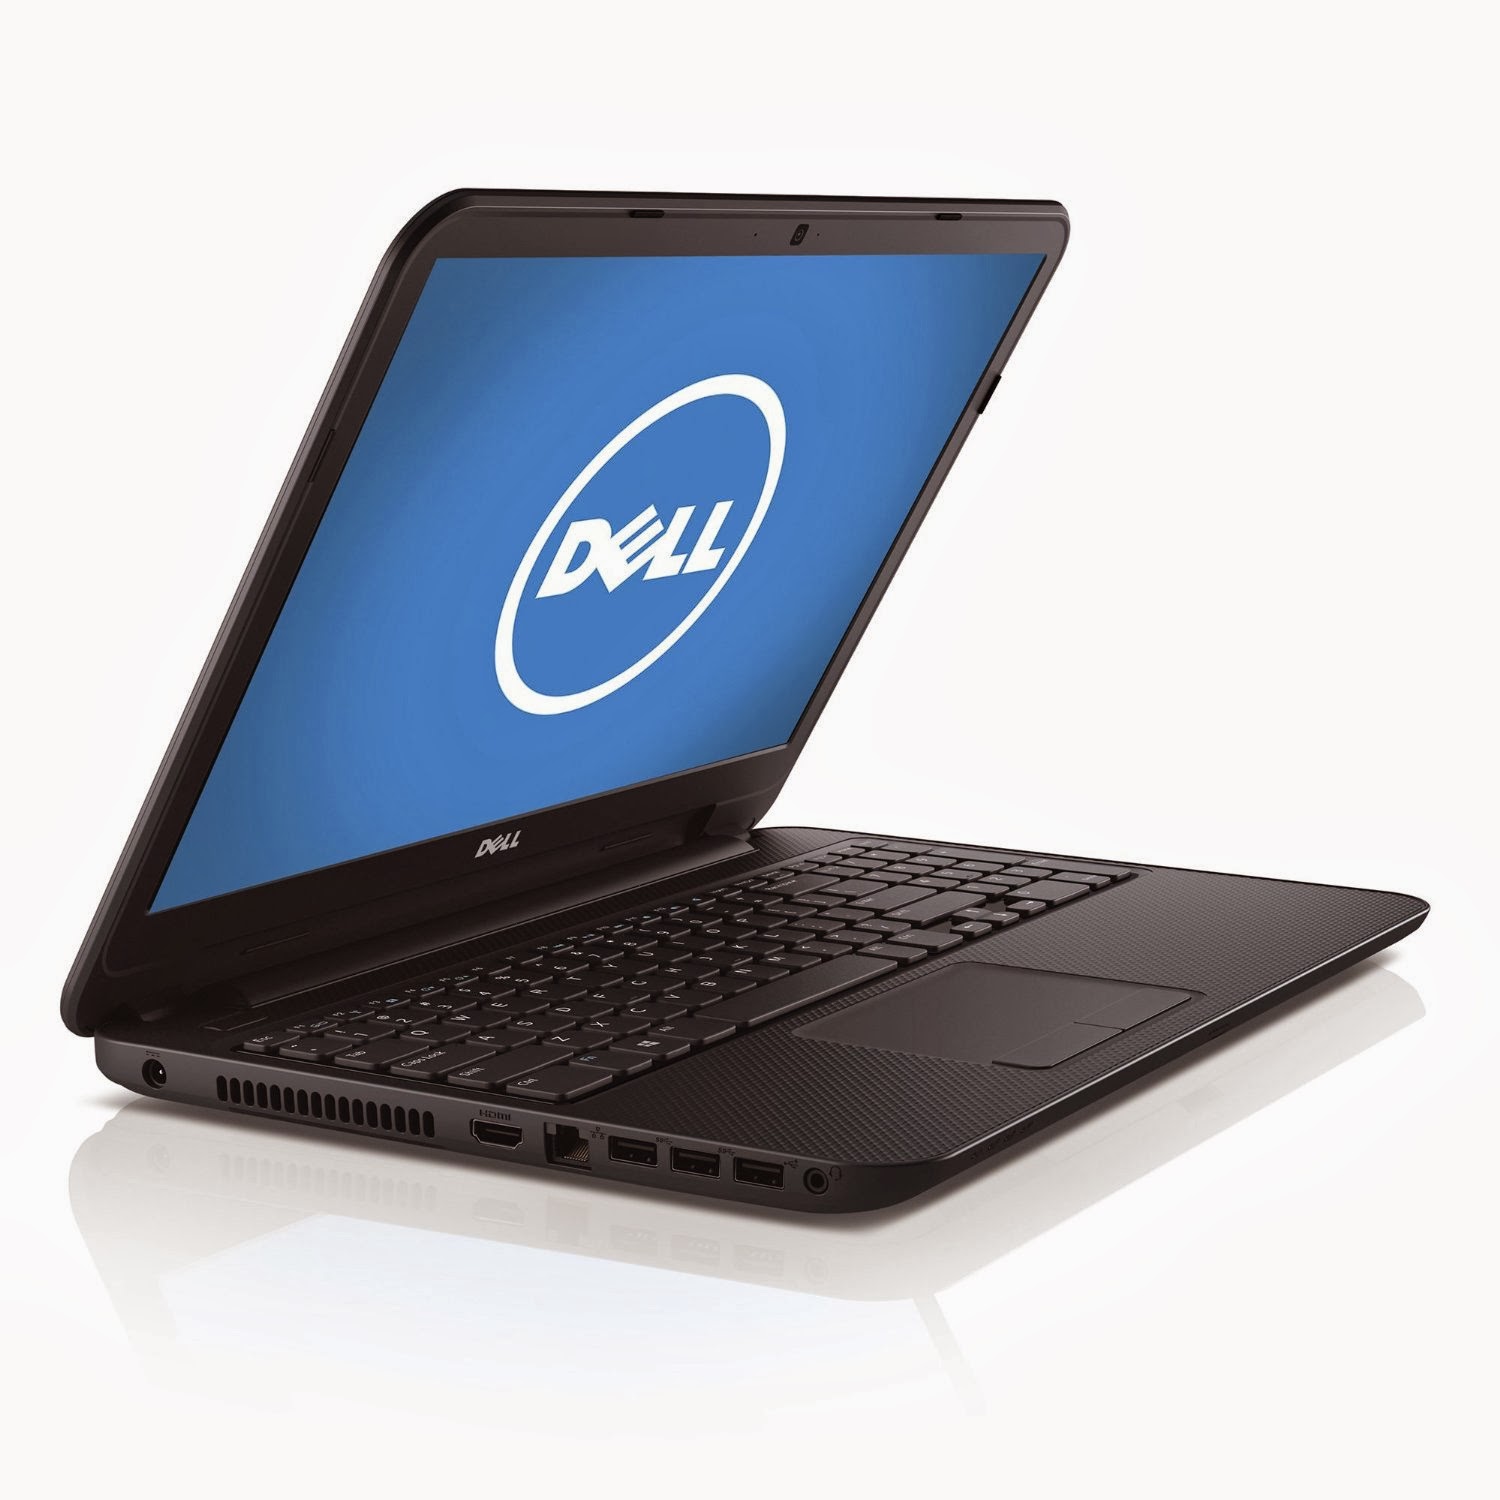 Dell 0jwfr6 Traditional Laptop User Guide